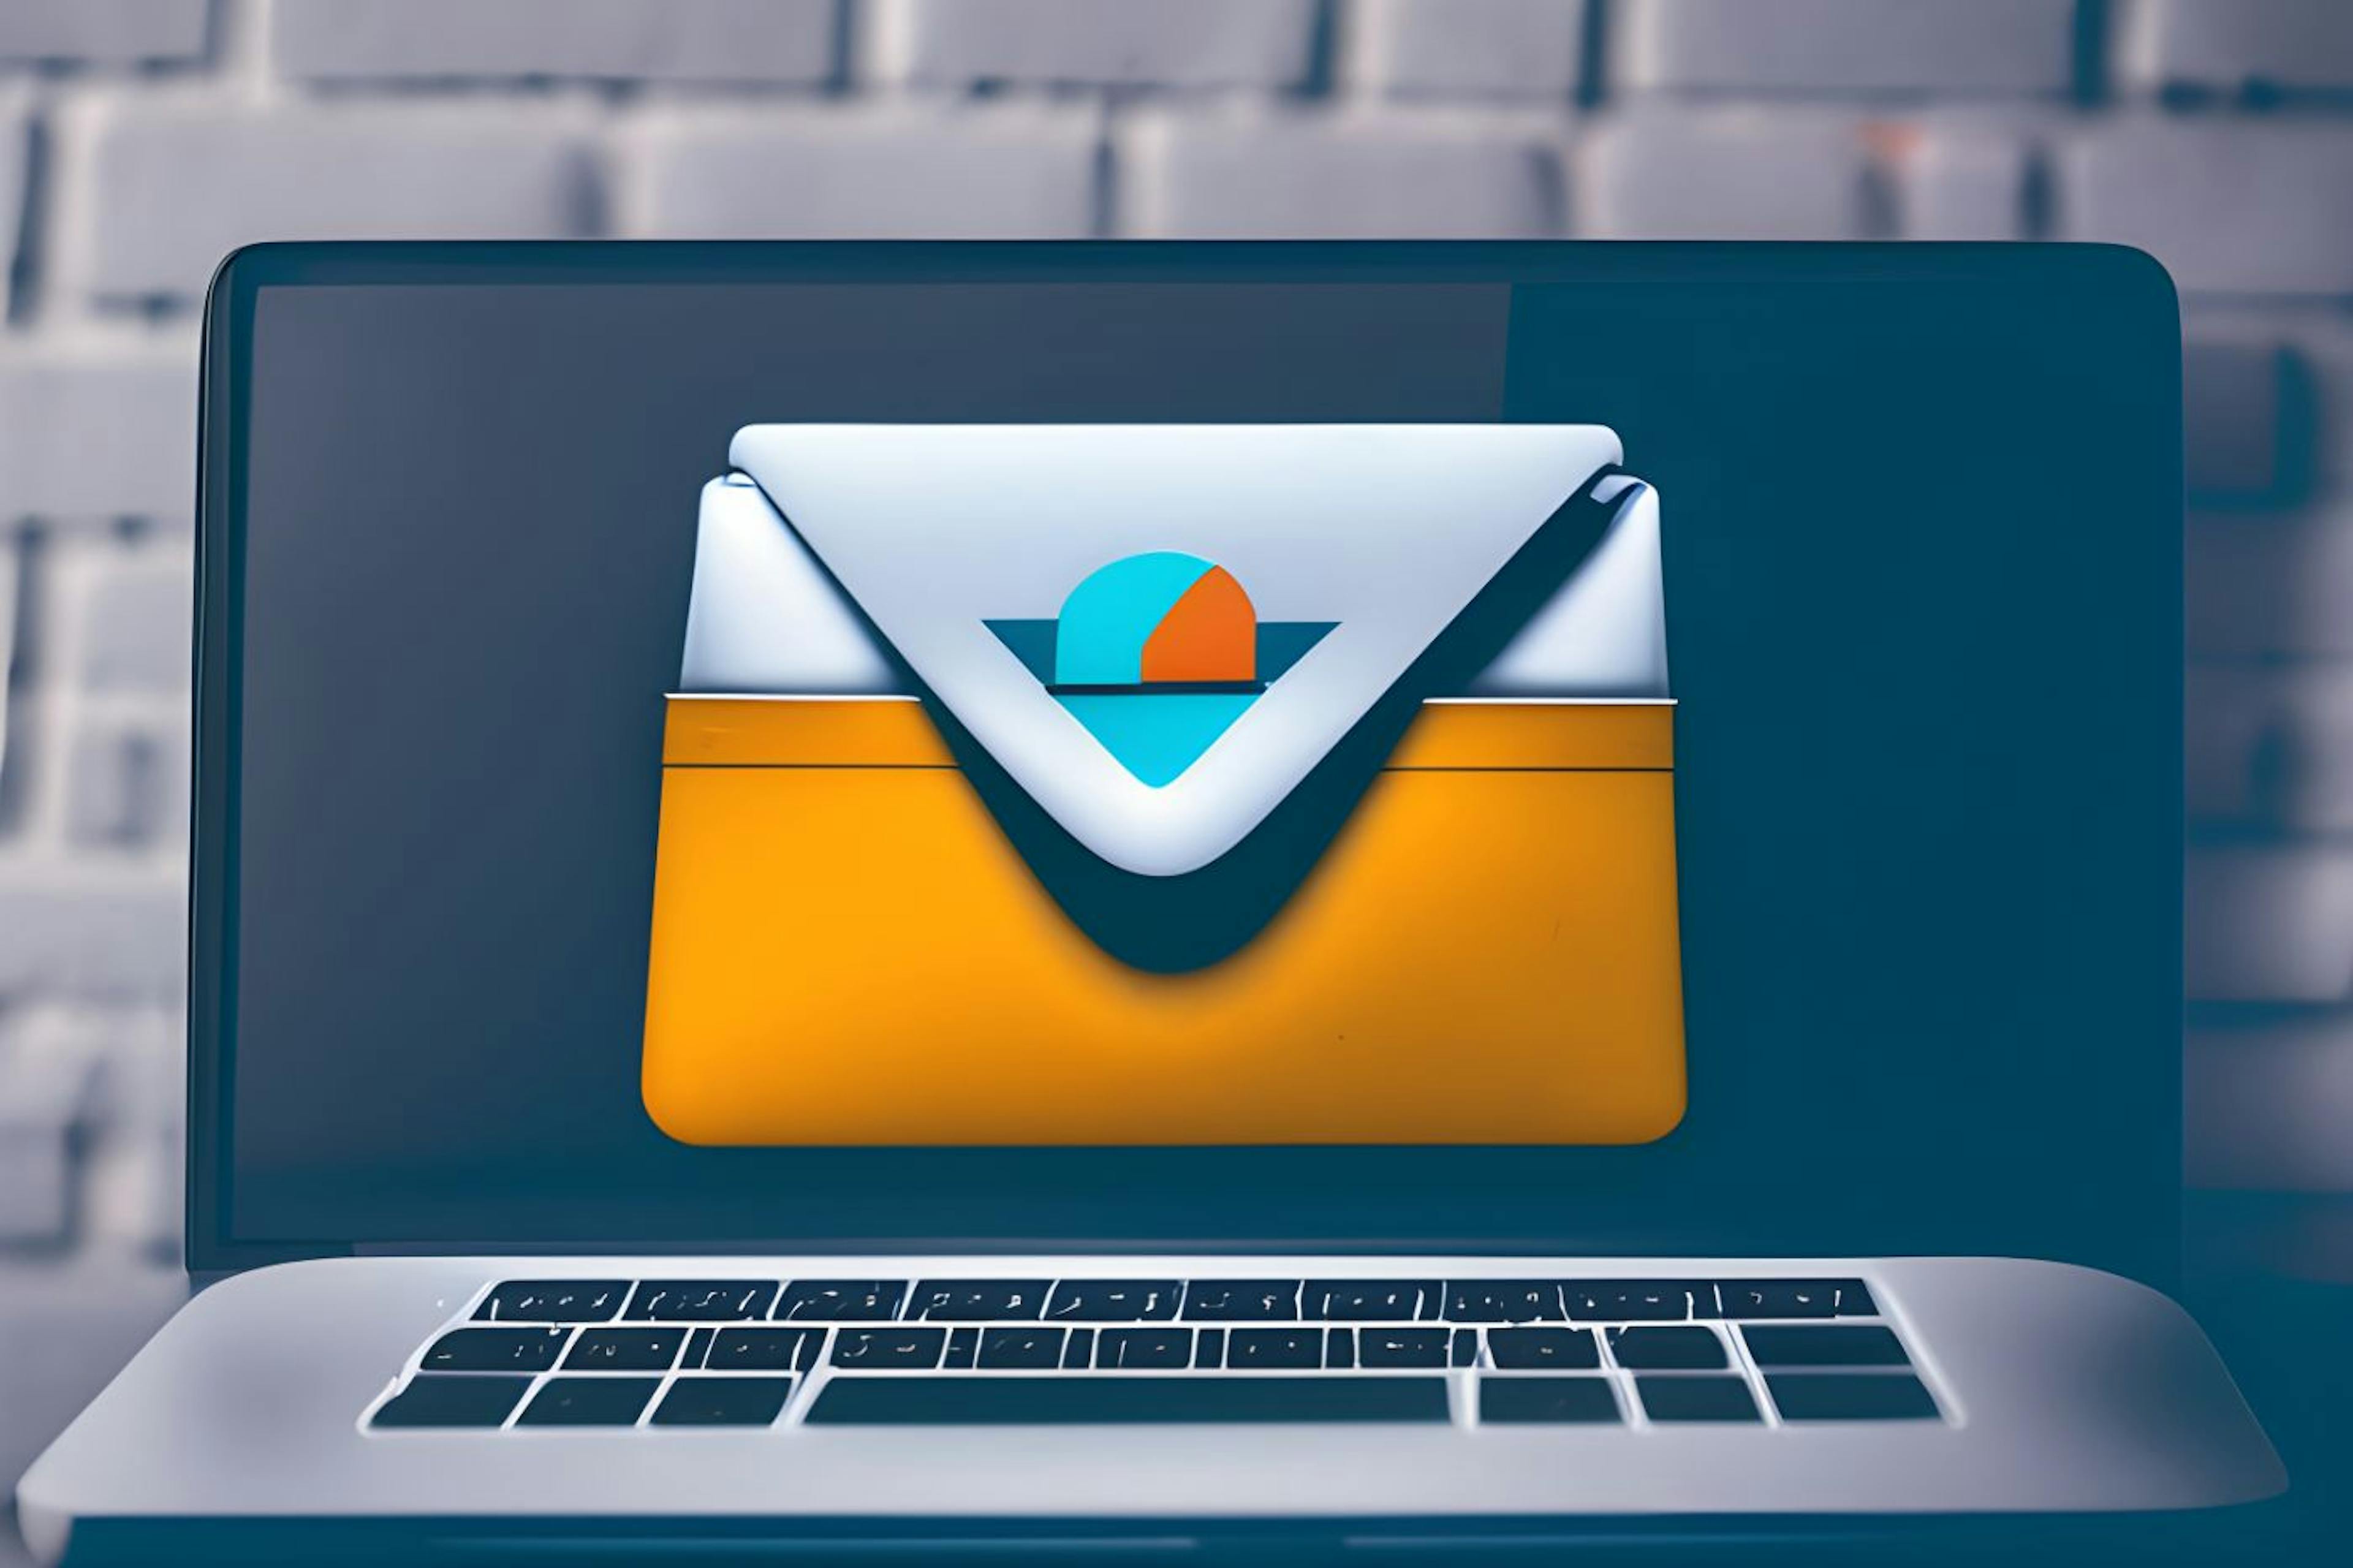 Email icon on a laptop Image